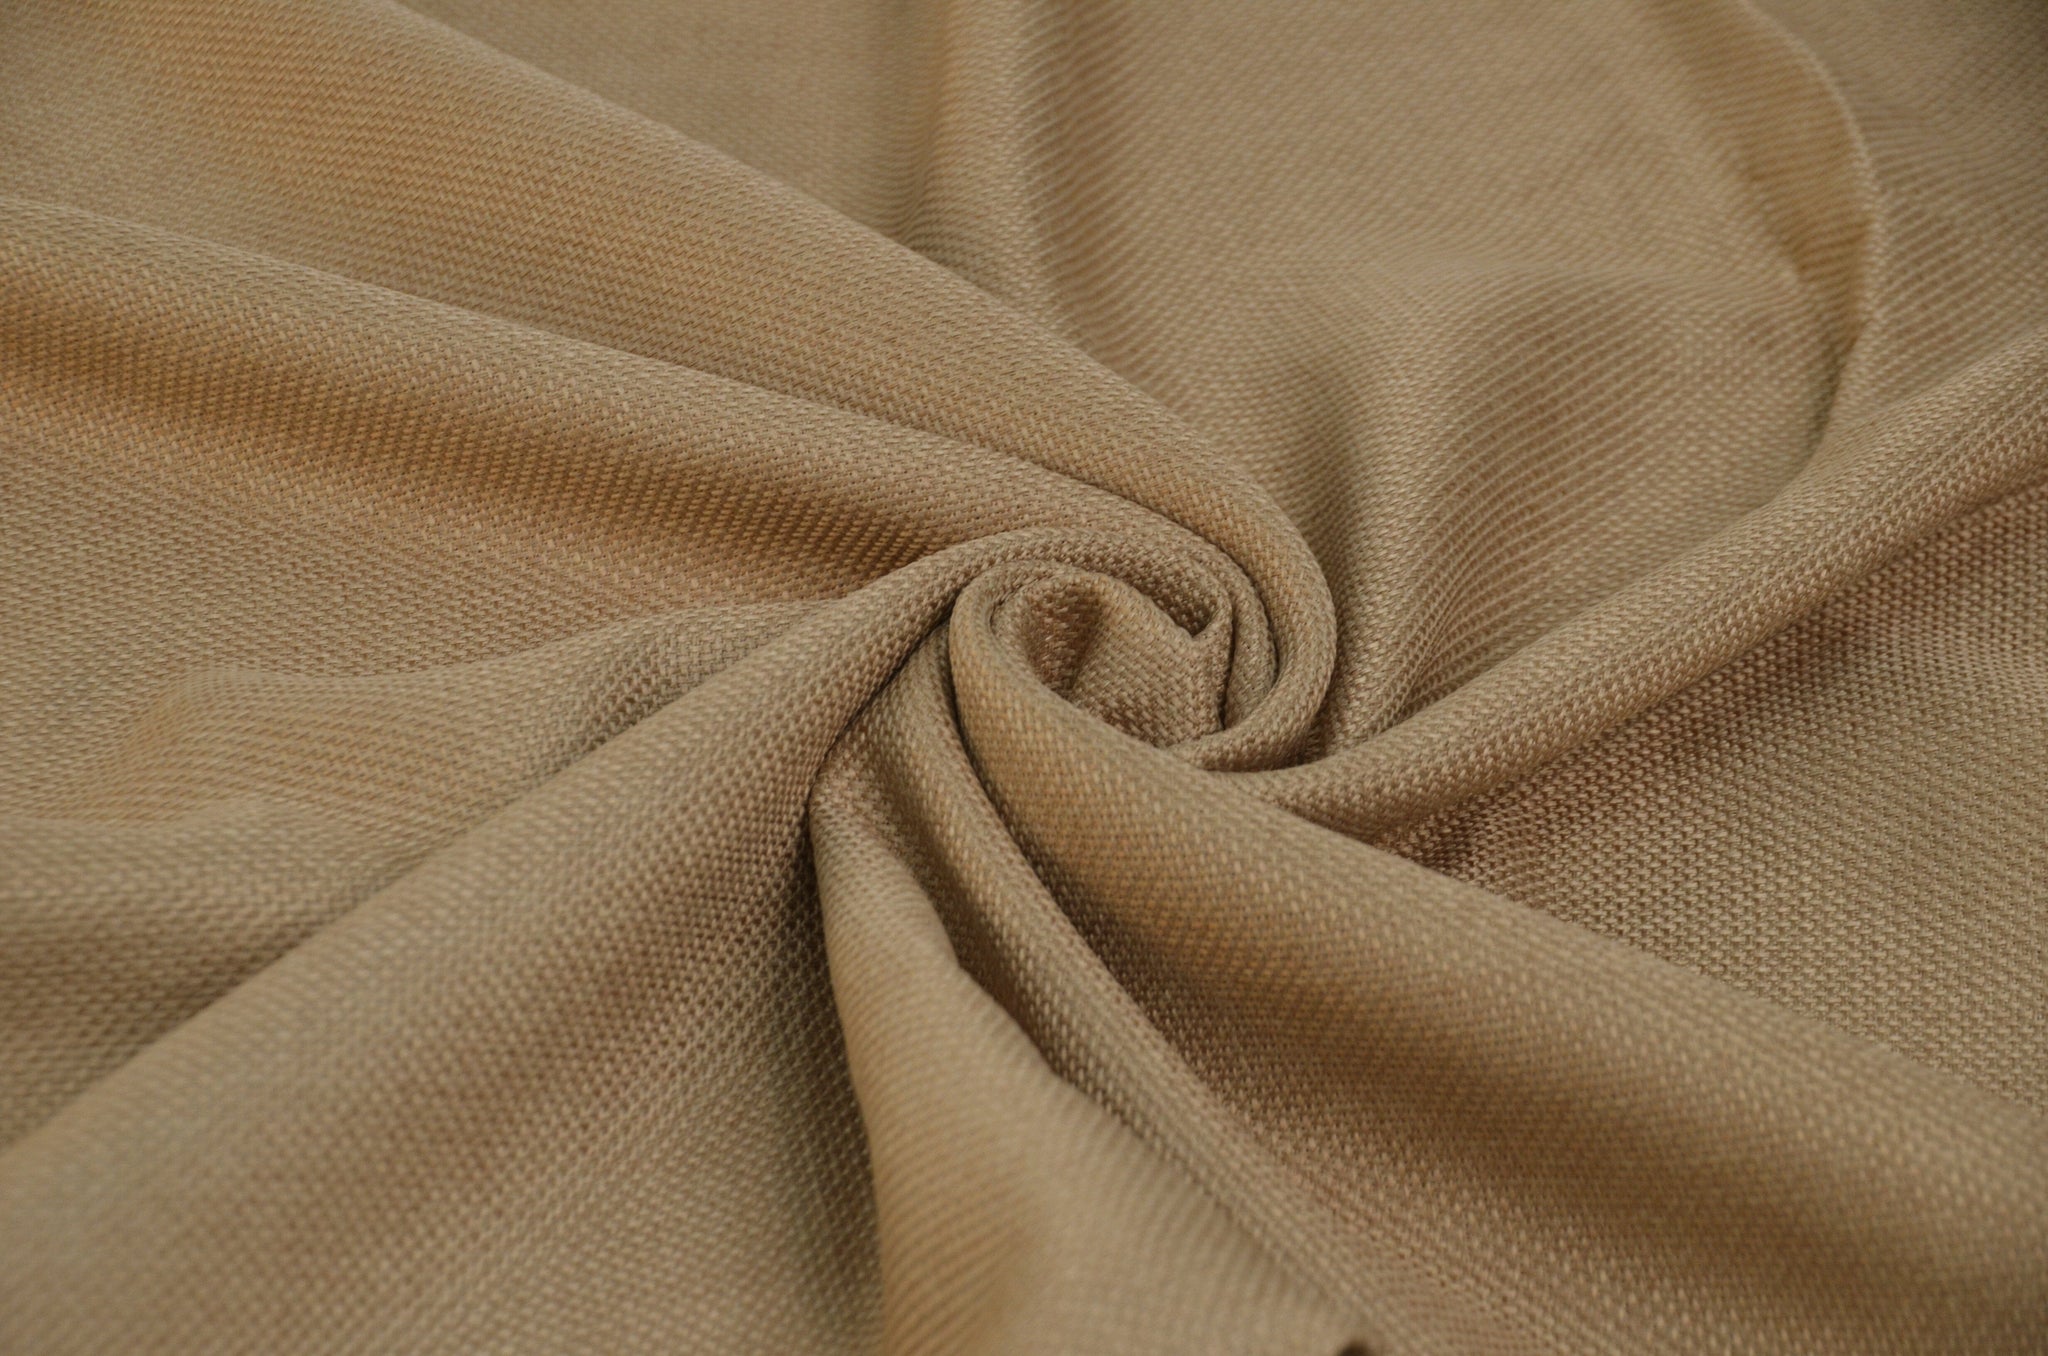 Washed 100% Cotton Fabric, Solid Color Cotton Fabric, Thick Cotton